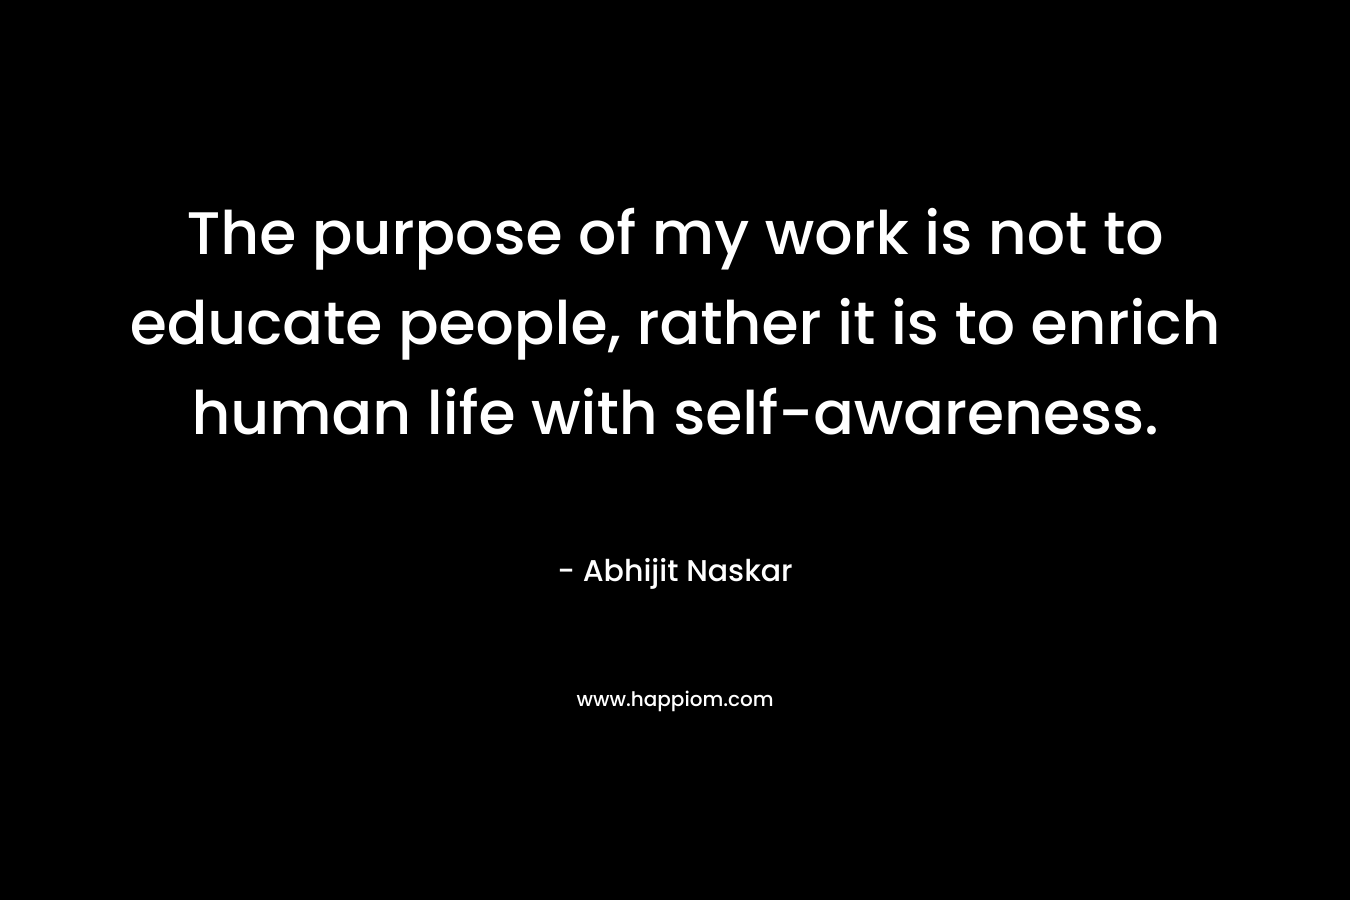 The purpose of my work is not to educate people, rather it is to enrich human life with self-awareness. – Abhijit Naskar